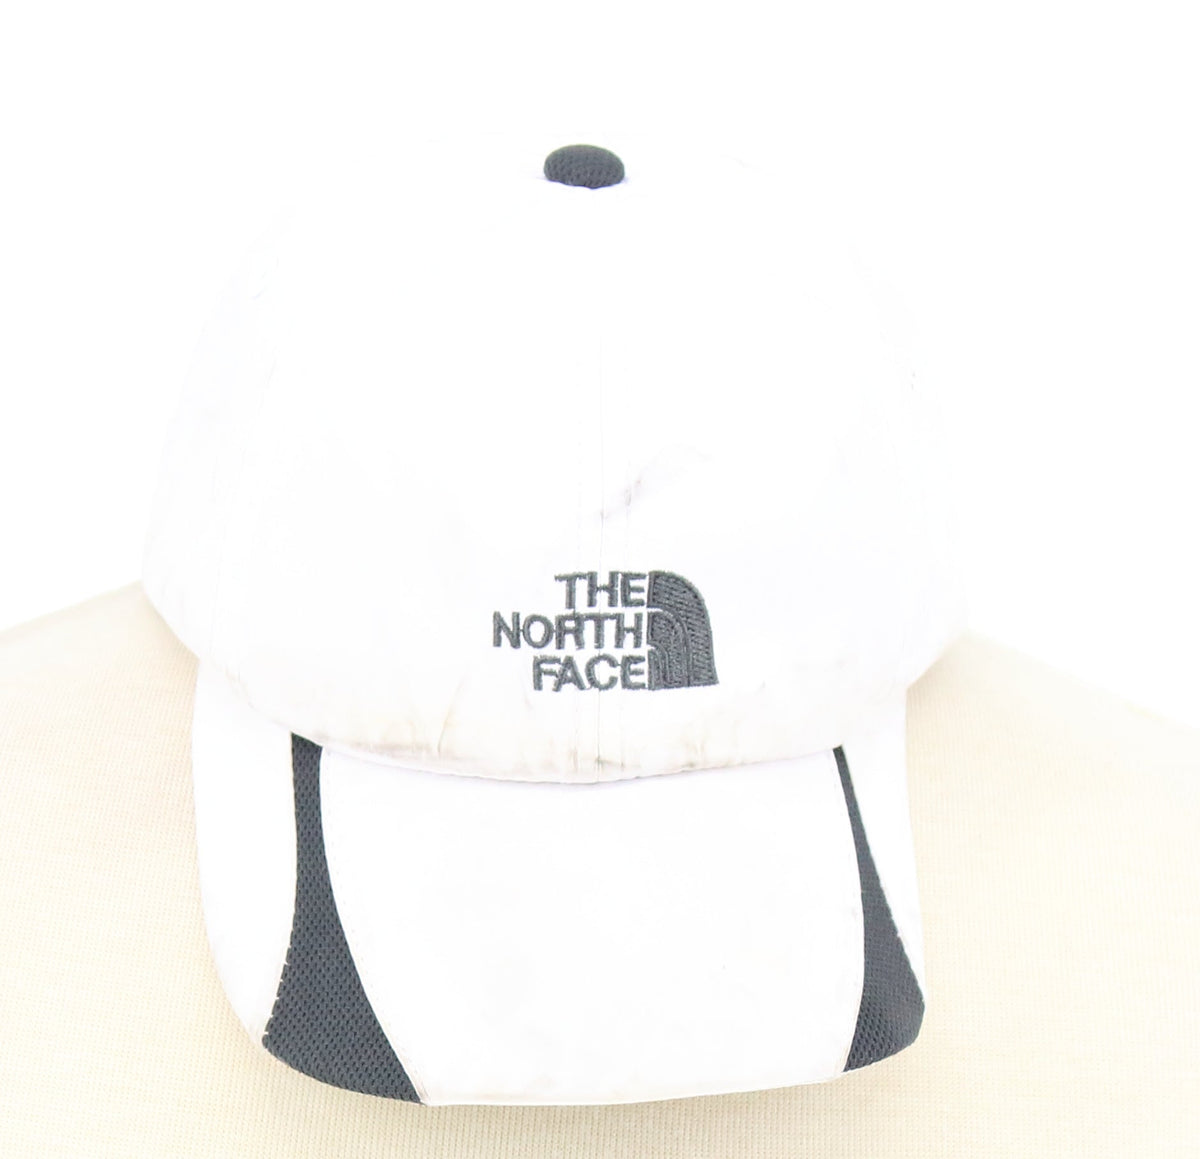 The North Face White Cap With Grey Embroided Logo At Front